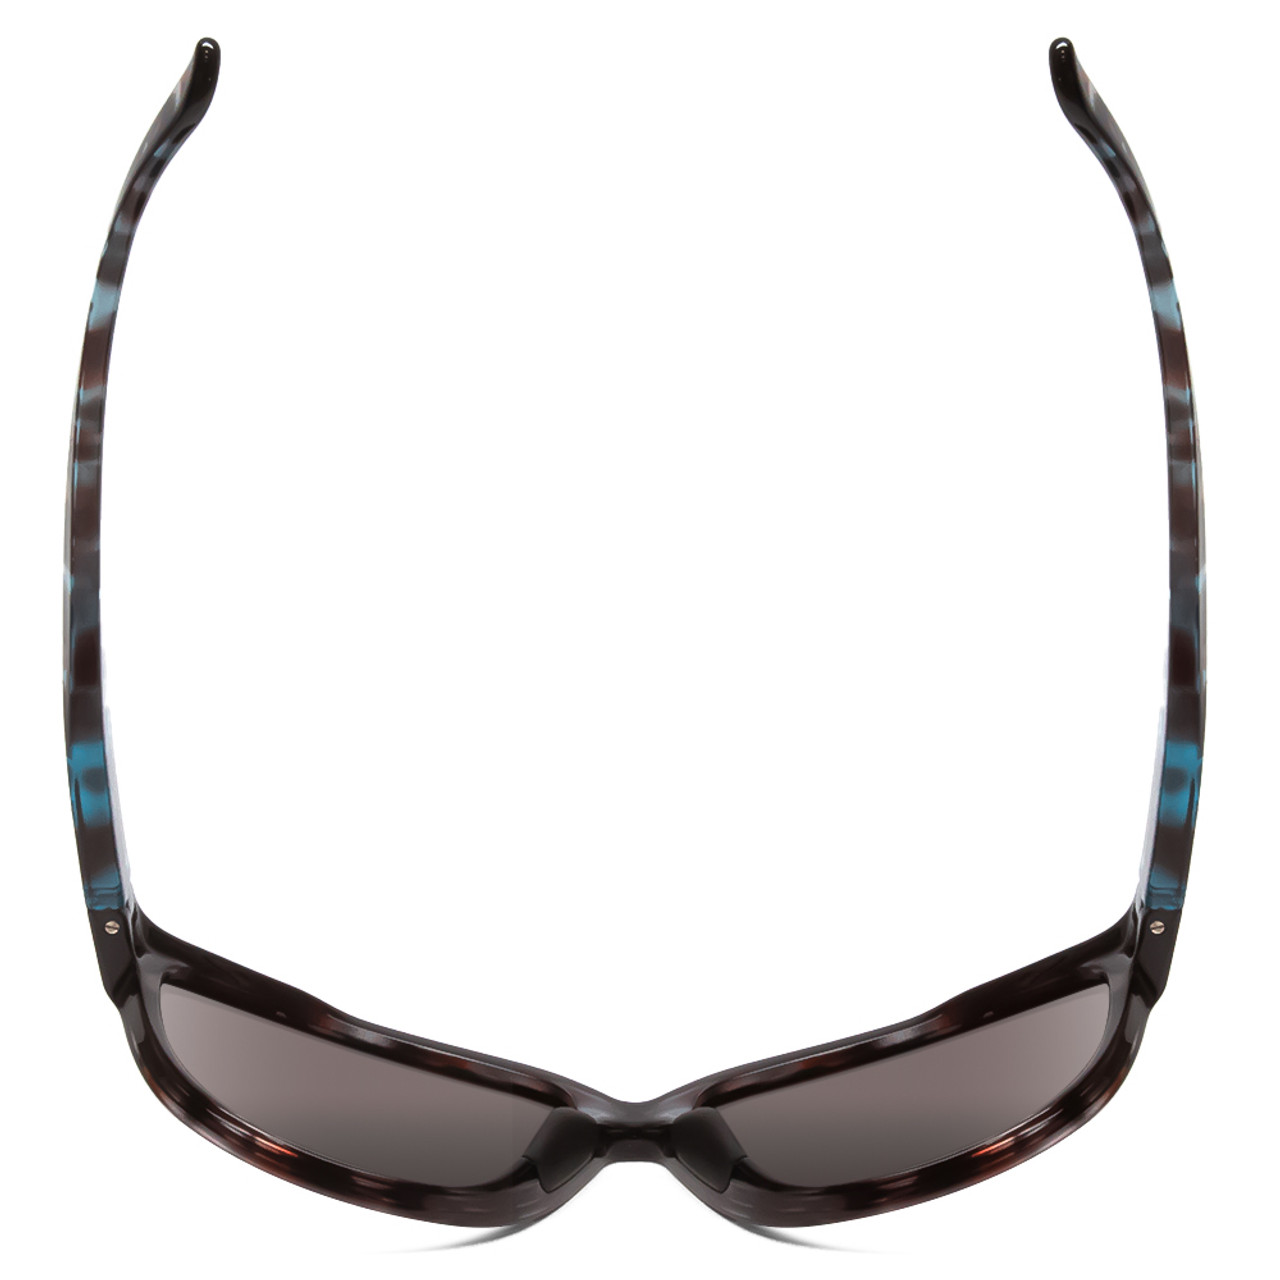 Top View of Smith Monterey Cateye Sunglasses in Tortoise/CP Glass Polarized Blue Mirror 58mm